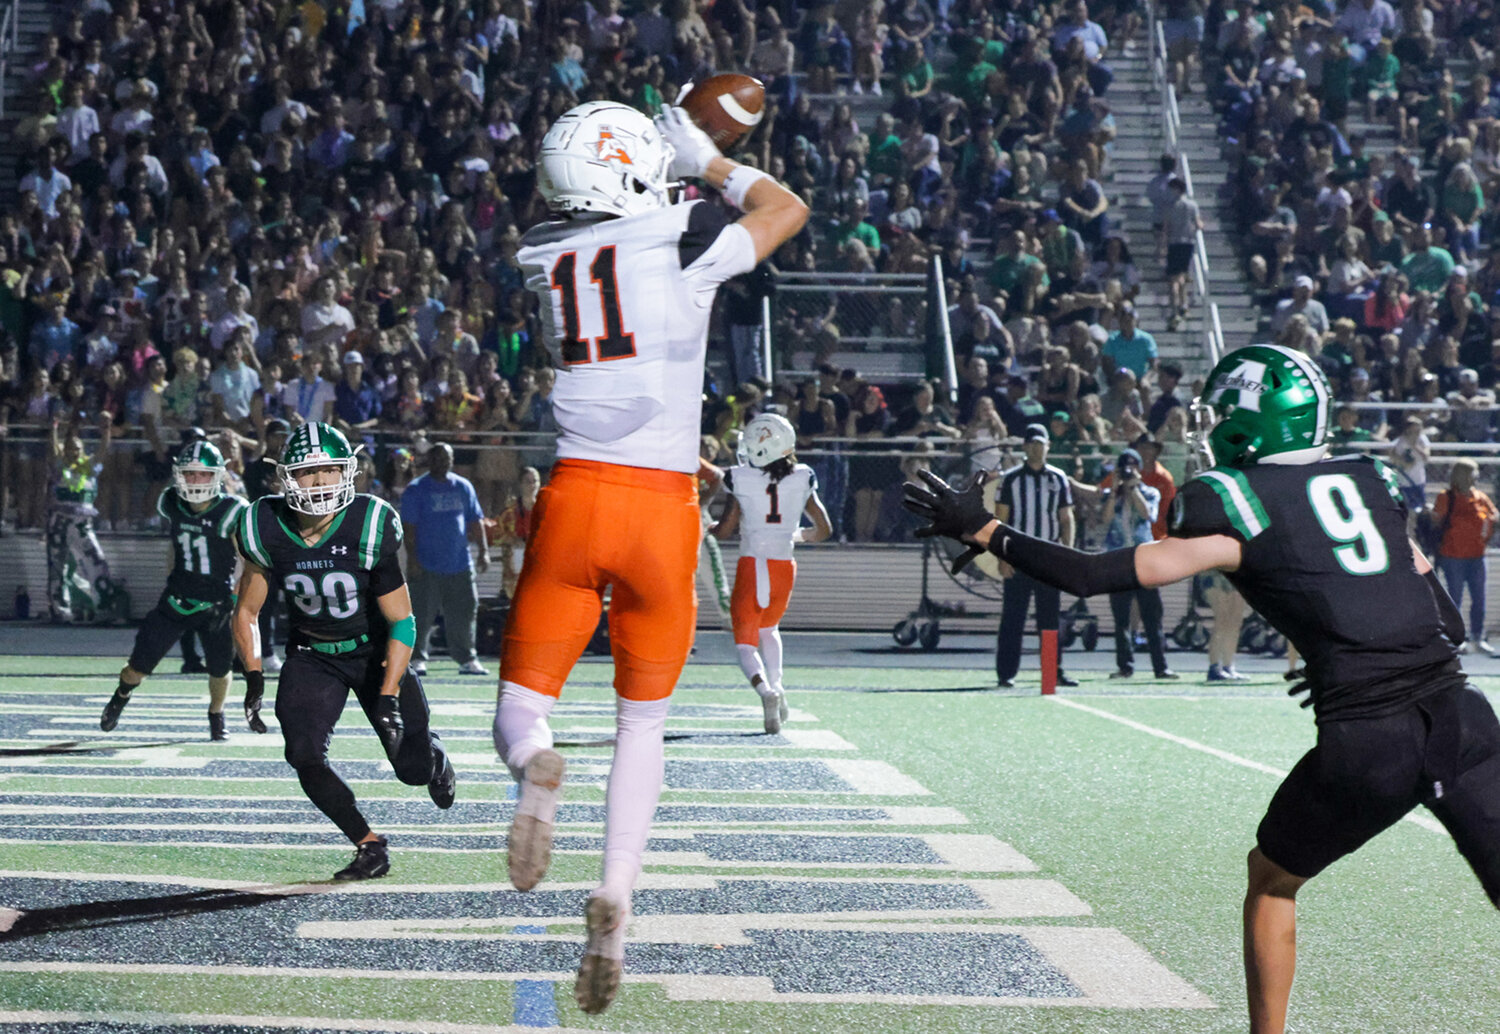 Trace Clarkson caught five passes for 146 yards and two touchdowns against Azle on Friday, Sept. 15.